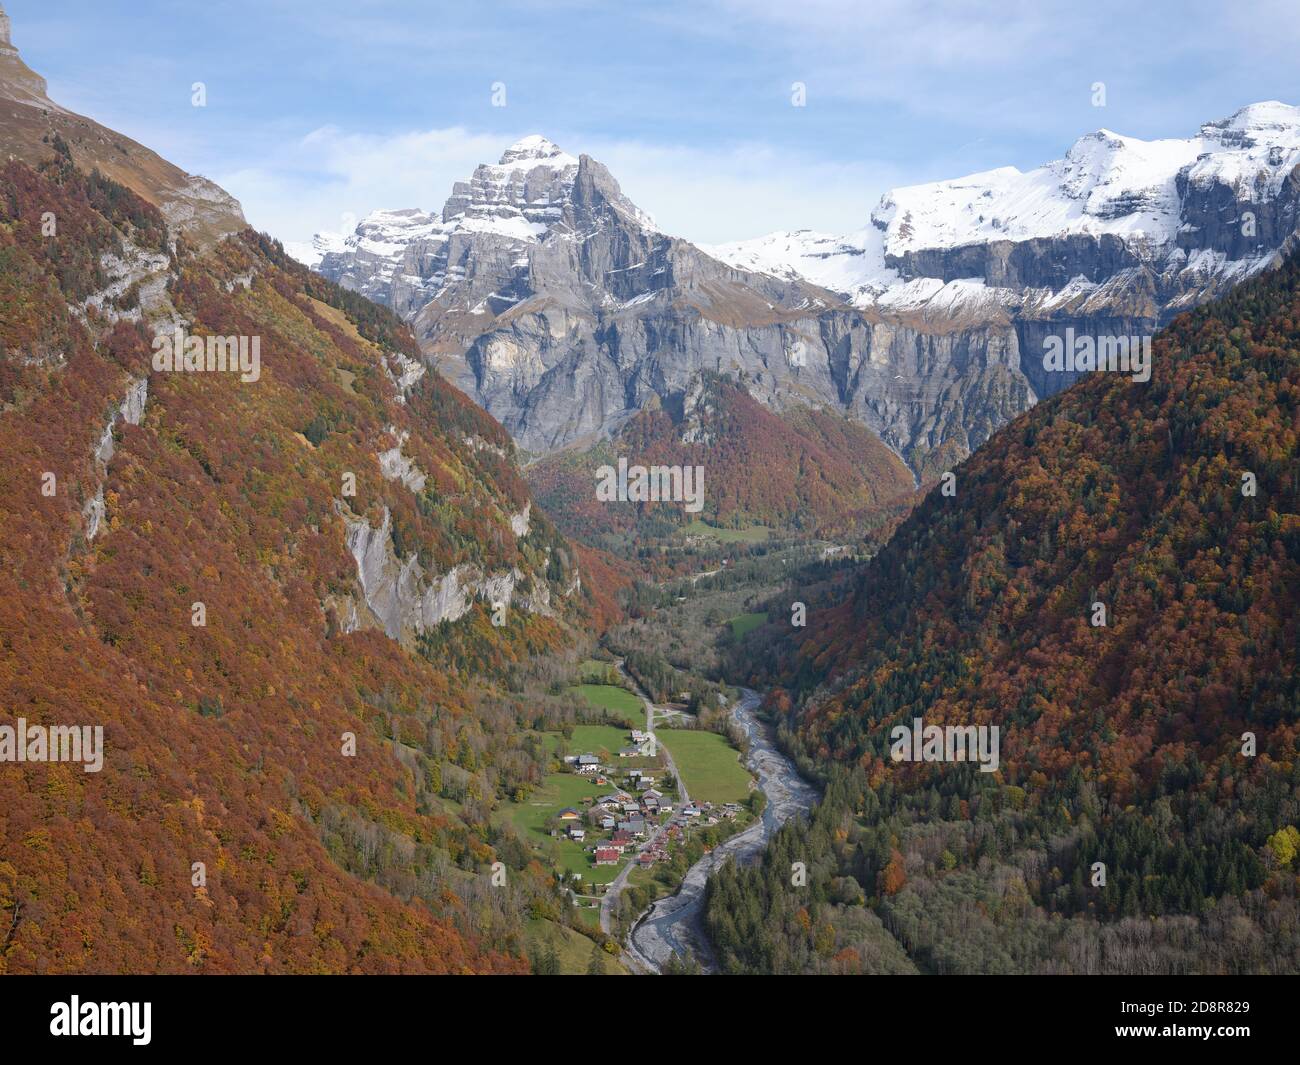 AERIAL VIEW. The sparsely populated Giffre Valley looking upstream towards the 2989-meter-high Tenneverge Peak. Nambride, Sixt-Fer-à-Cheval, France. Stock Photo